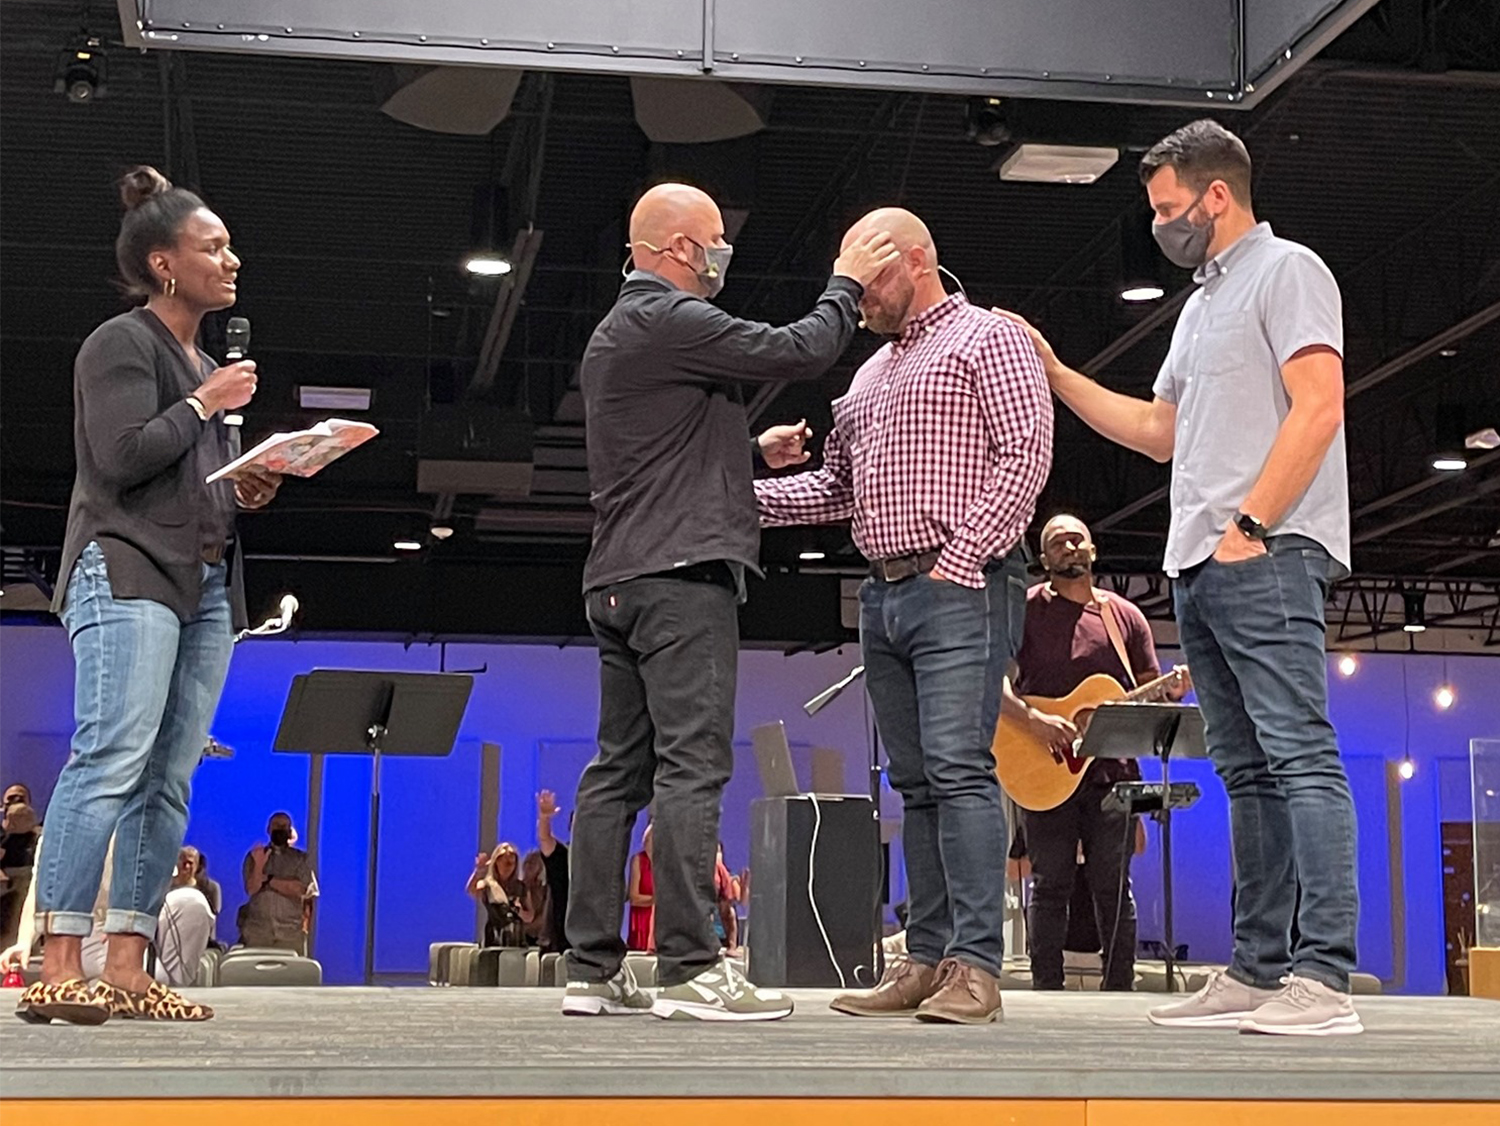 Co-pastors Ashlee Eiland, from left, and Troy Hatfield lead a service at Mars Hill Bible Church in Grandville, Michigan, in Sept. 2021. Courtesy photo